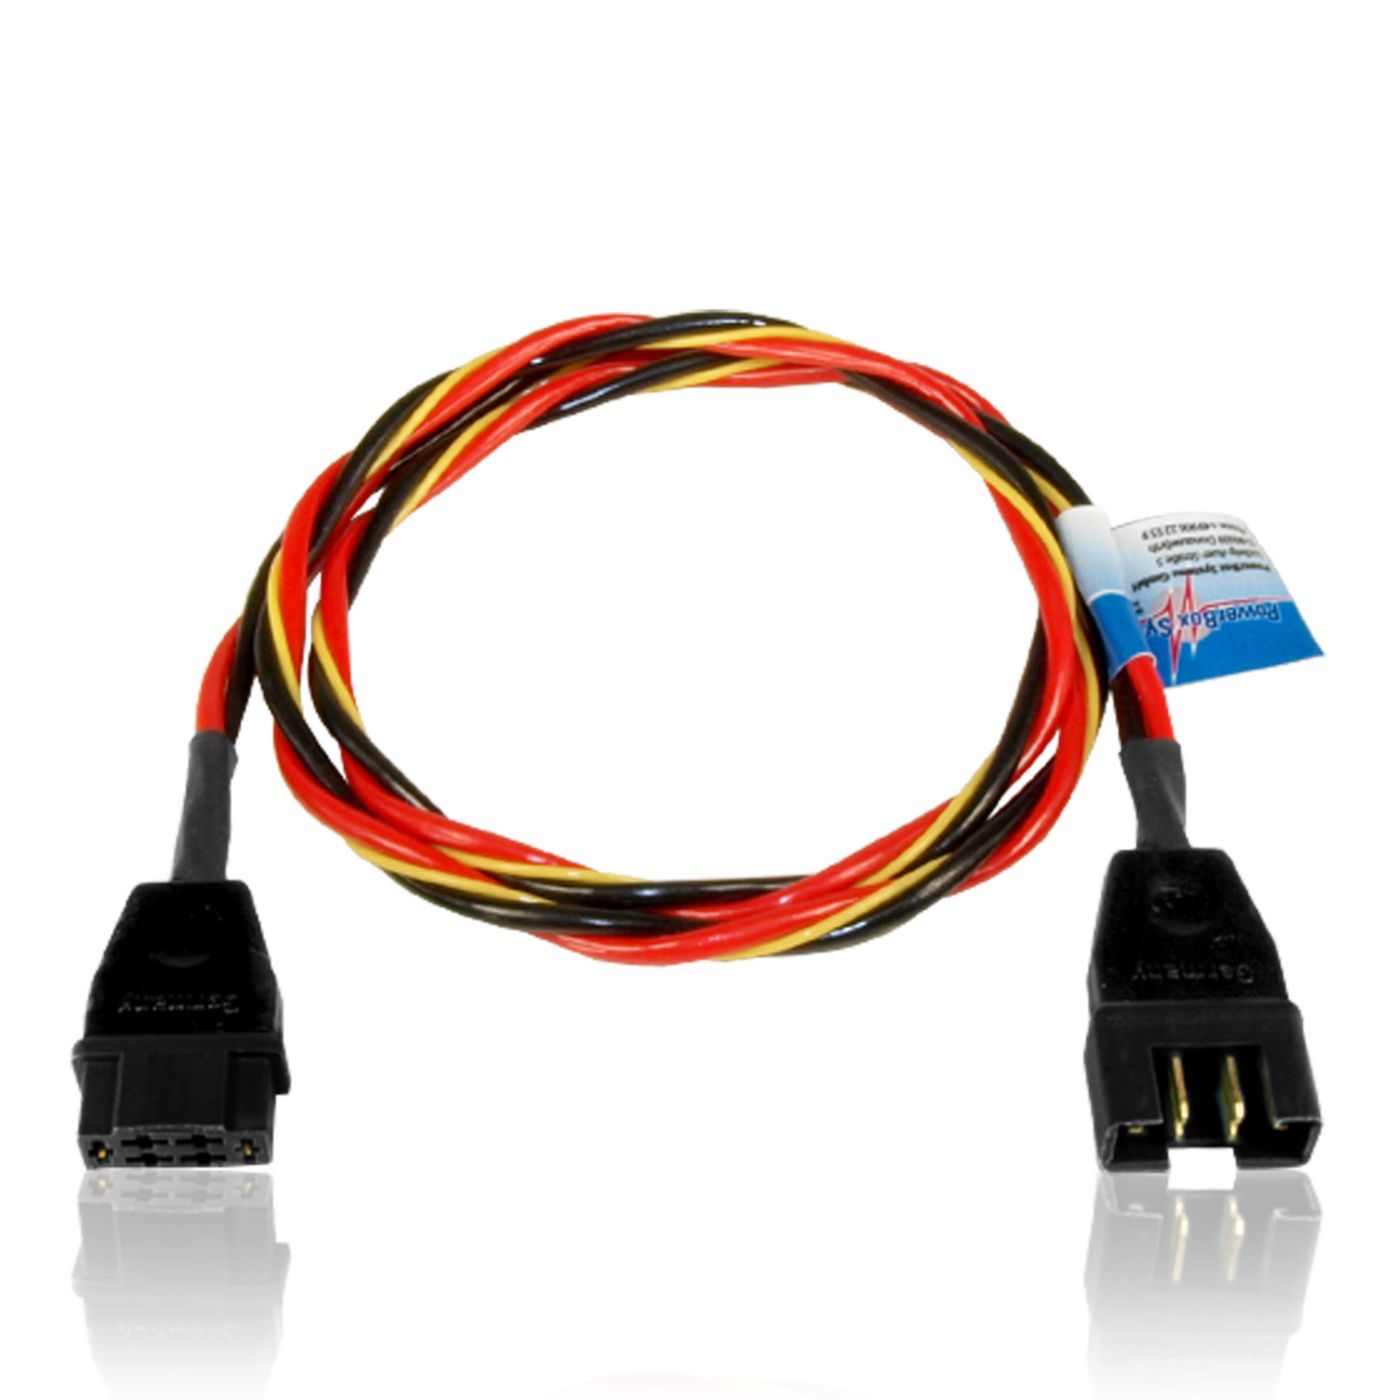 PowerBox Systems Cable set Premium "one4two" MPX 160cm length